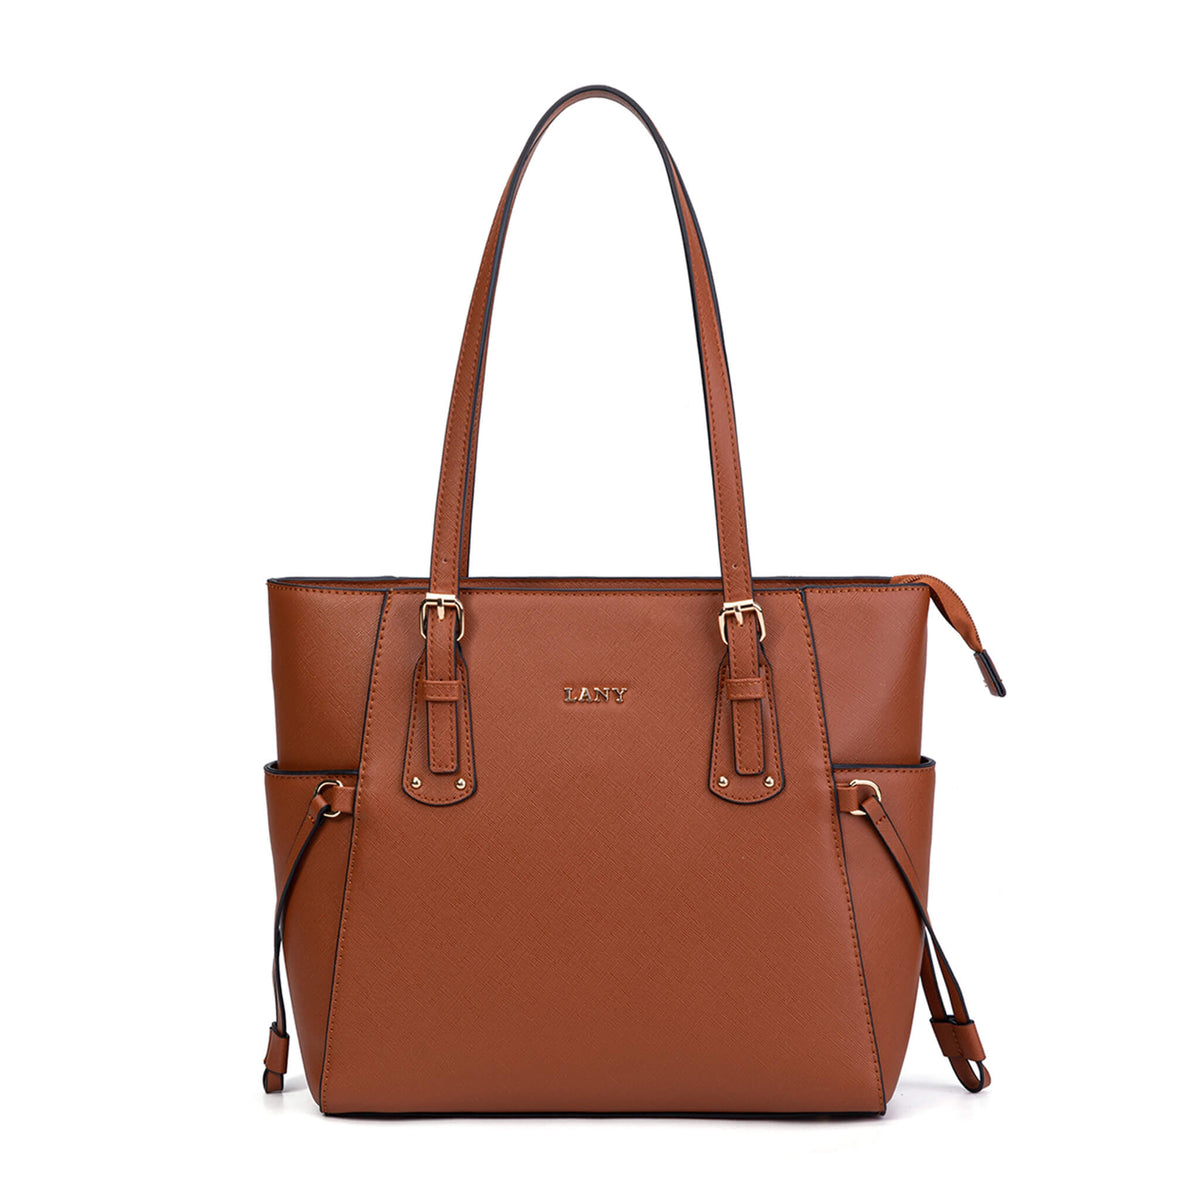 LANY Classic Tote 3-Set - LANY